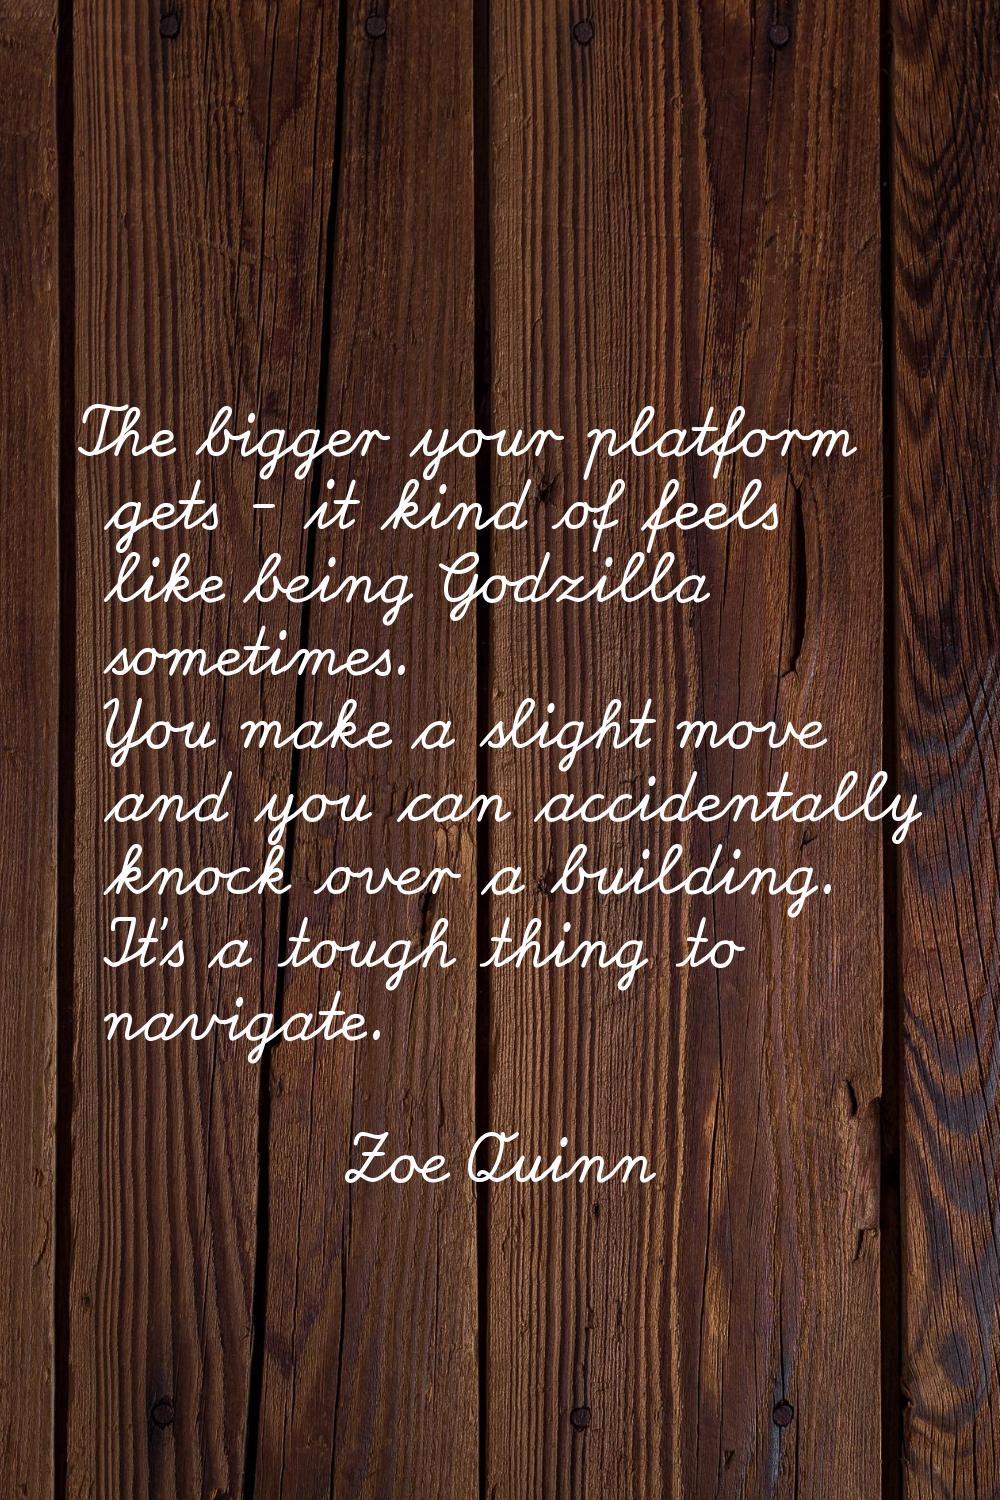 The bigger your platform gets - it kind of feels like being Godzilla sometimes. You make a slight m